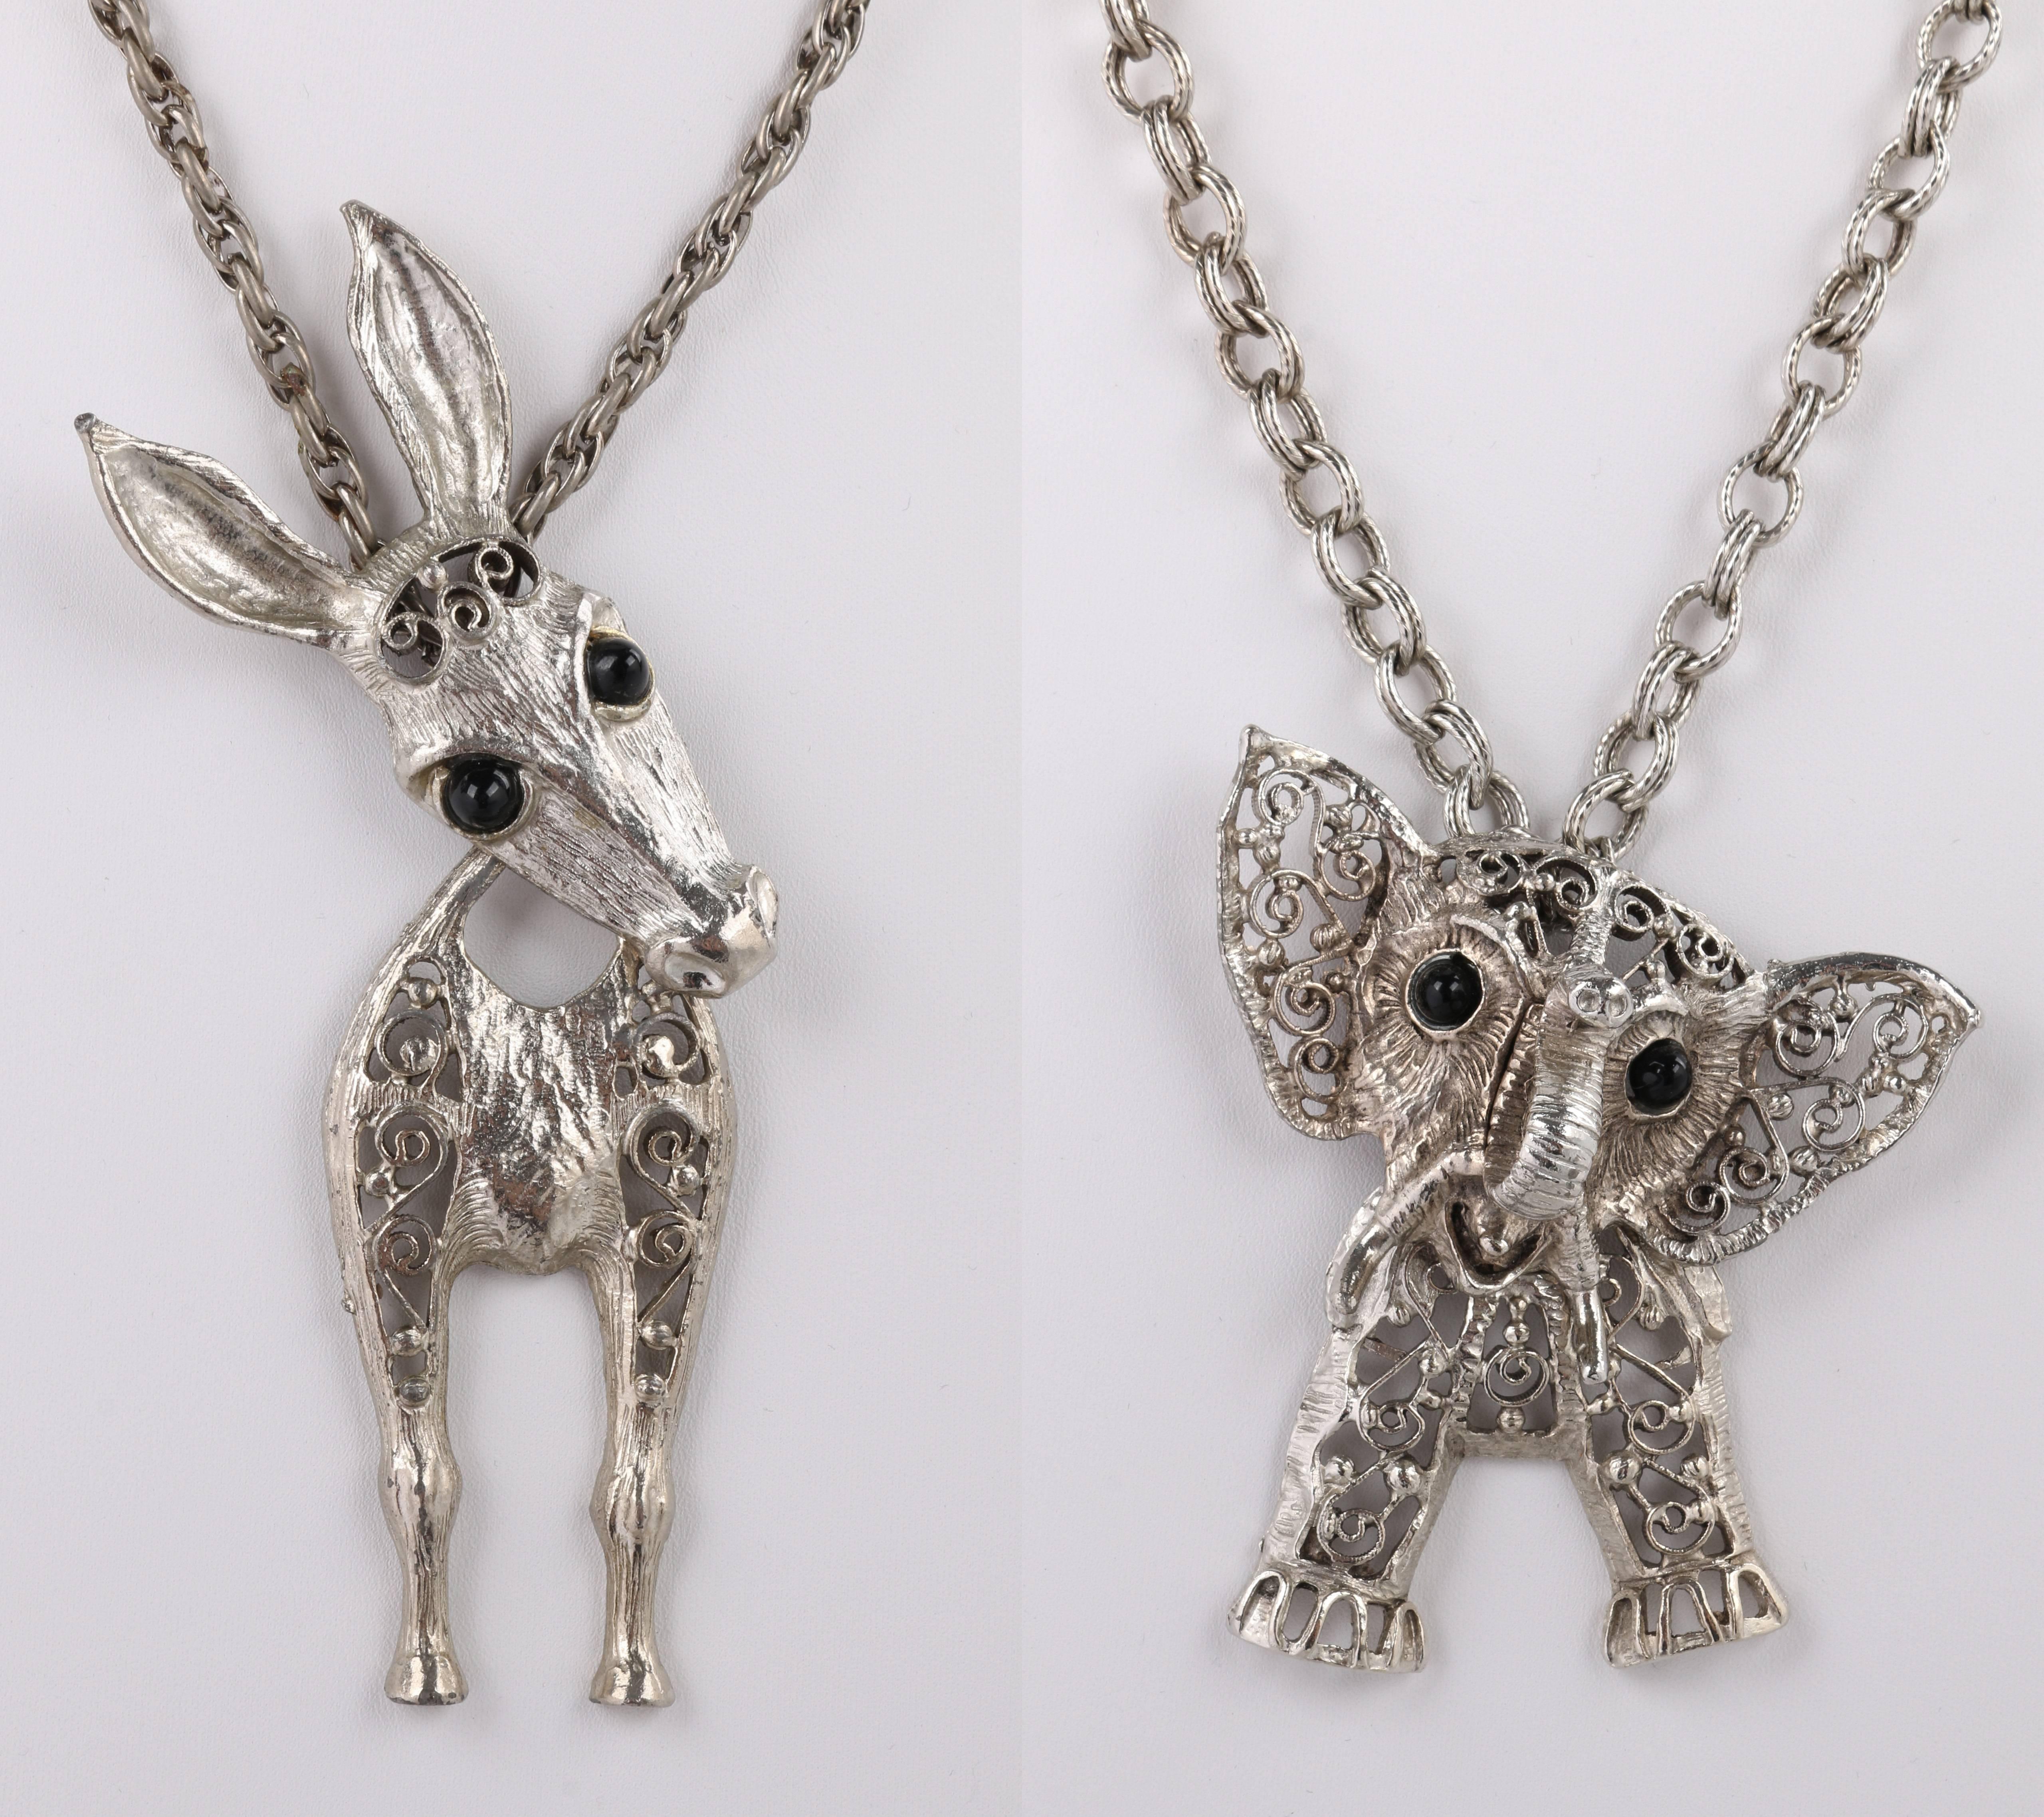 Vintage c.1970's Juliana Deliza & Elster two piece silver articulated donkey & elephant ( political ?) pendant statement necklace set. Featured on pages 47 and 52 of 